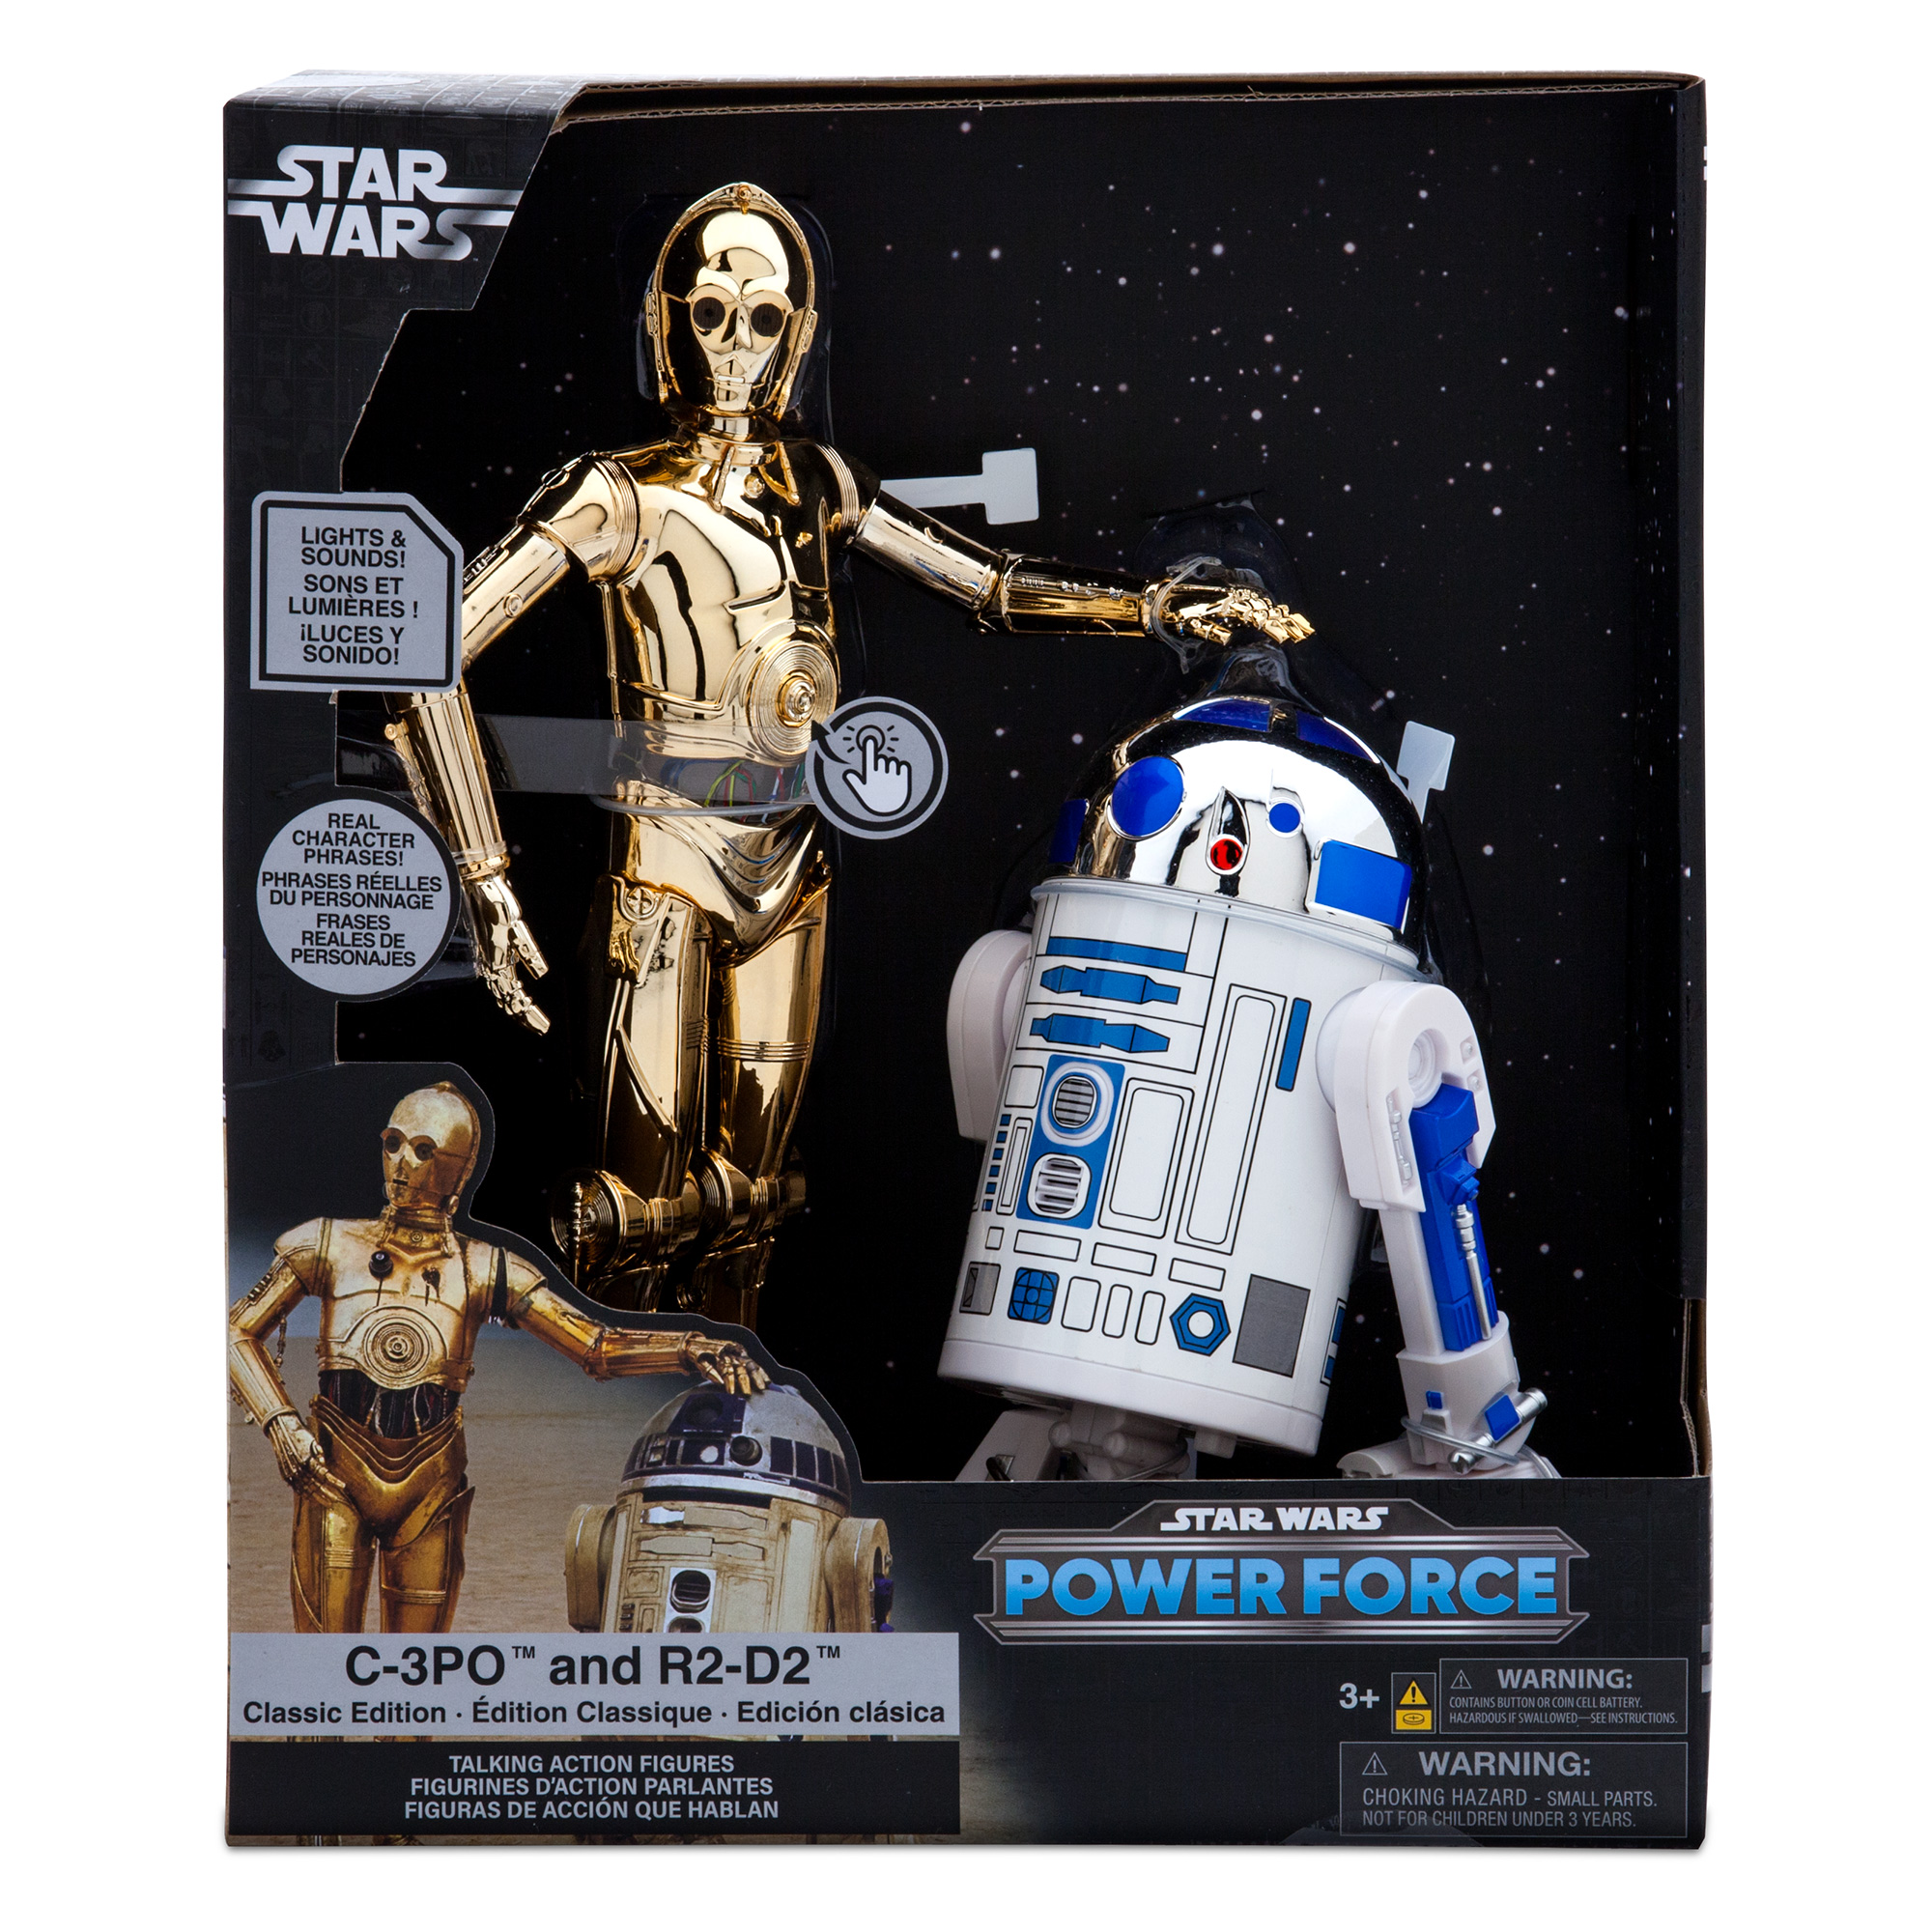 Disney Exclusive C-3PO and R2-D2 Talking Figure Set - Available 5/4 At 8AM PT